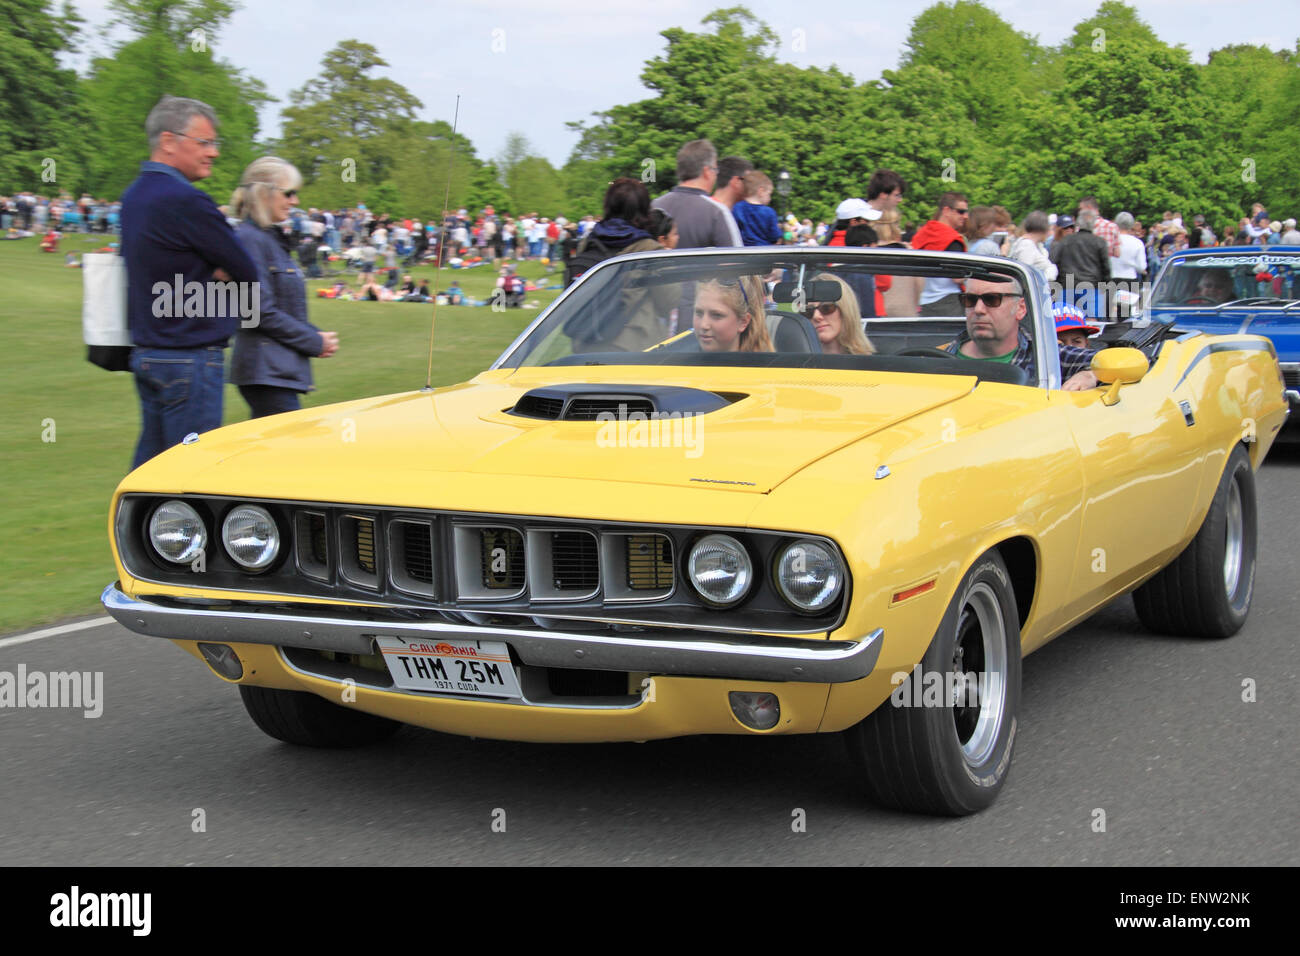 Plymouth Barracuda (1971). Chestnut Sunday, 10th May 2015. Bushy Park, Hampton Court, London Borough of Richmond, England, Great Britain, United Kingdom, UK, Europe. Vintage and classic vehicle parade and displays with fairground attractions and military reenactments. Credit:  Ian Bottle / Alamy Live News Stock Photo